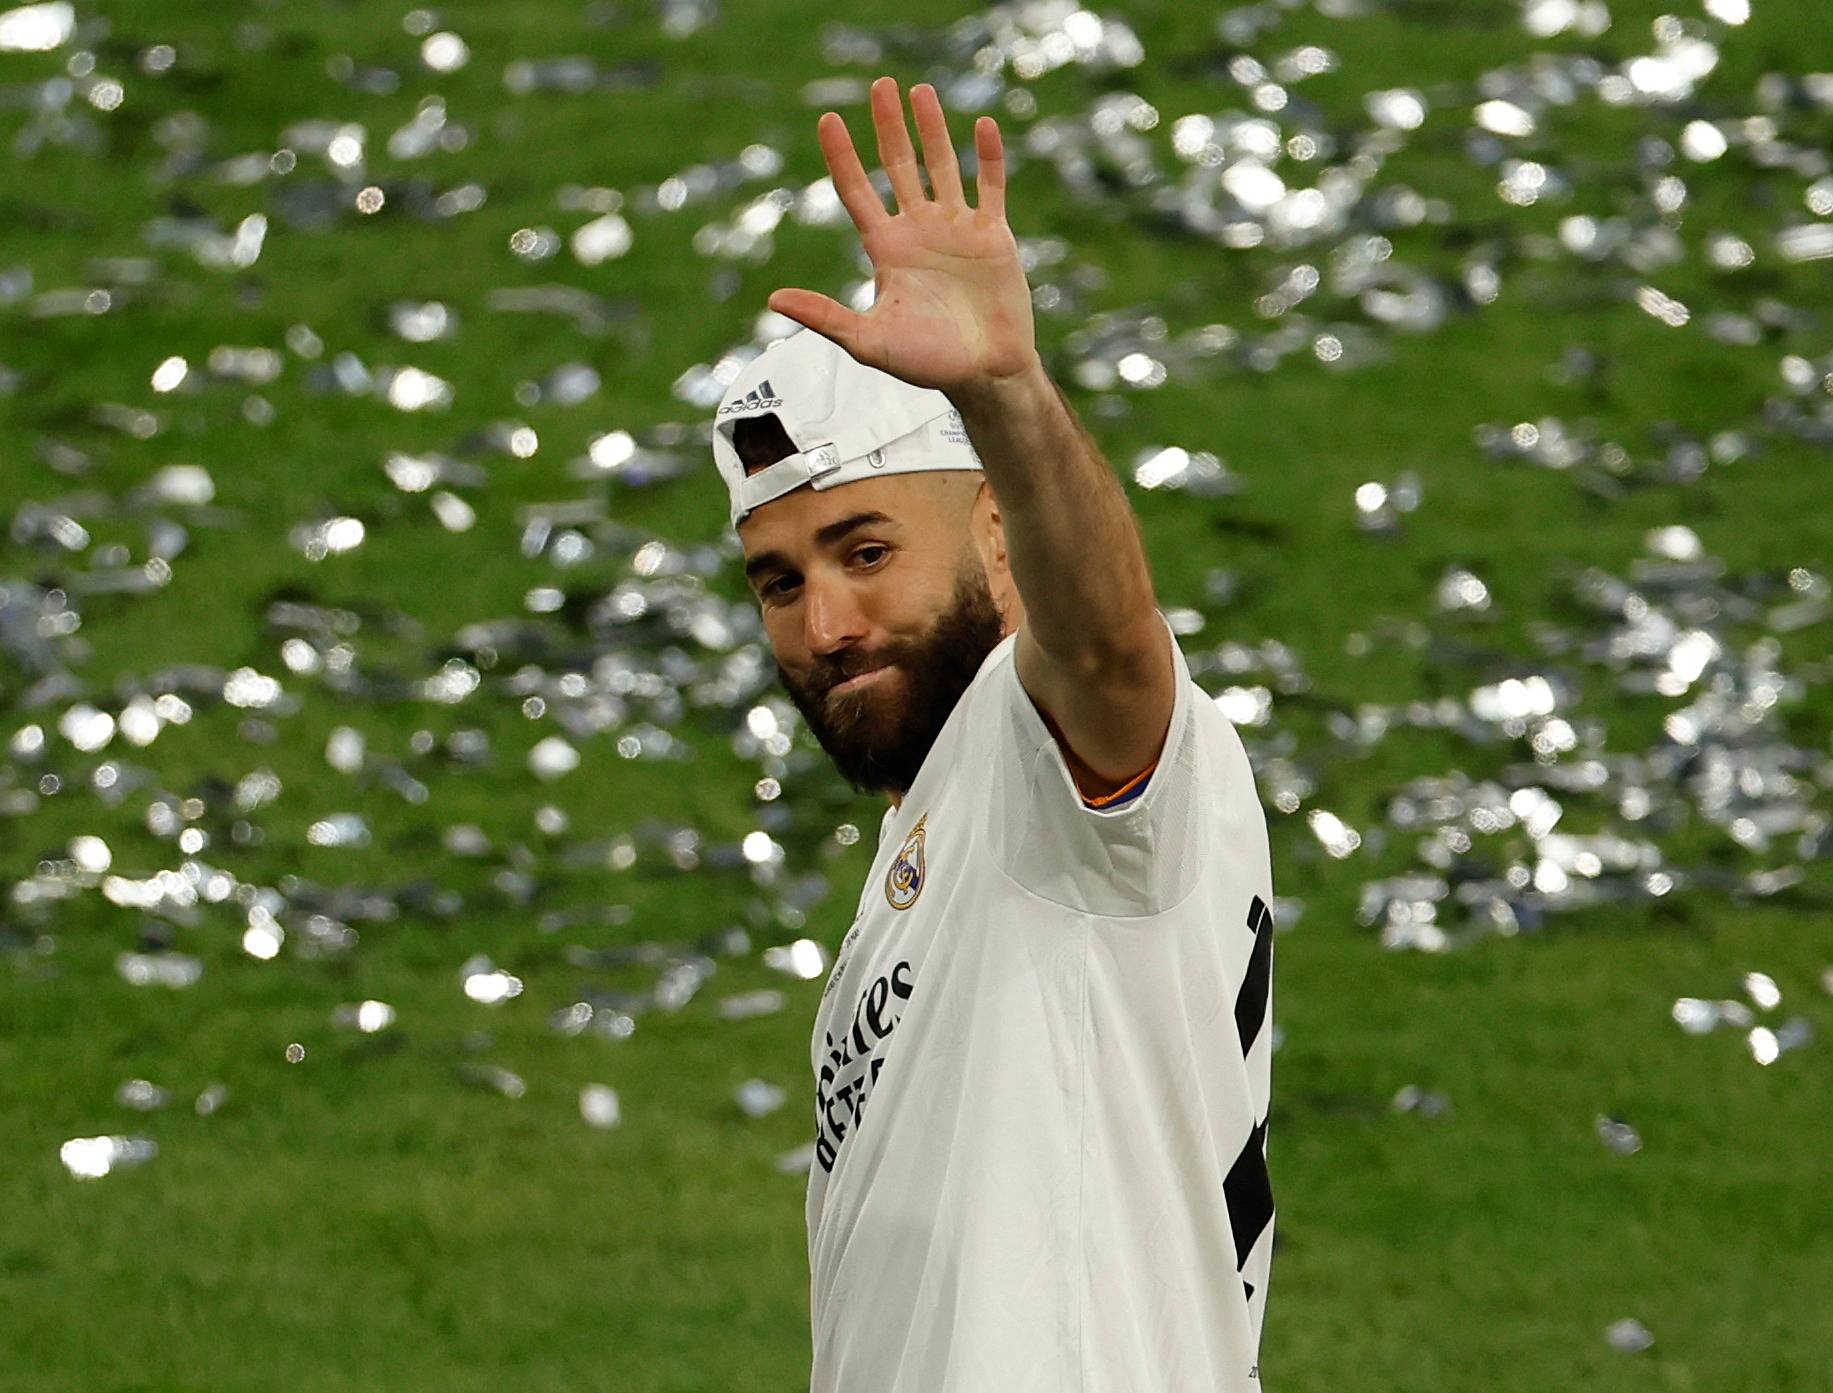 Real Madrid's Benzema waves.